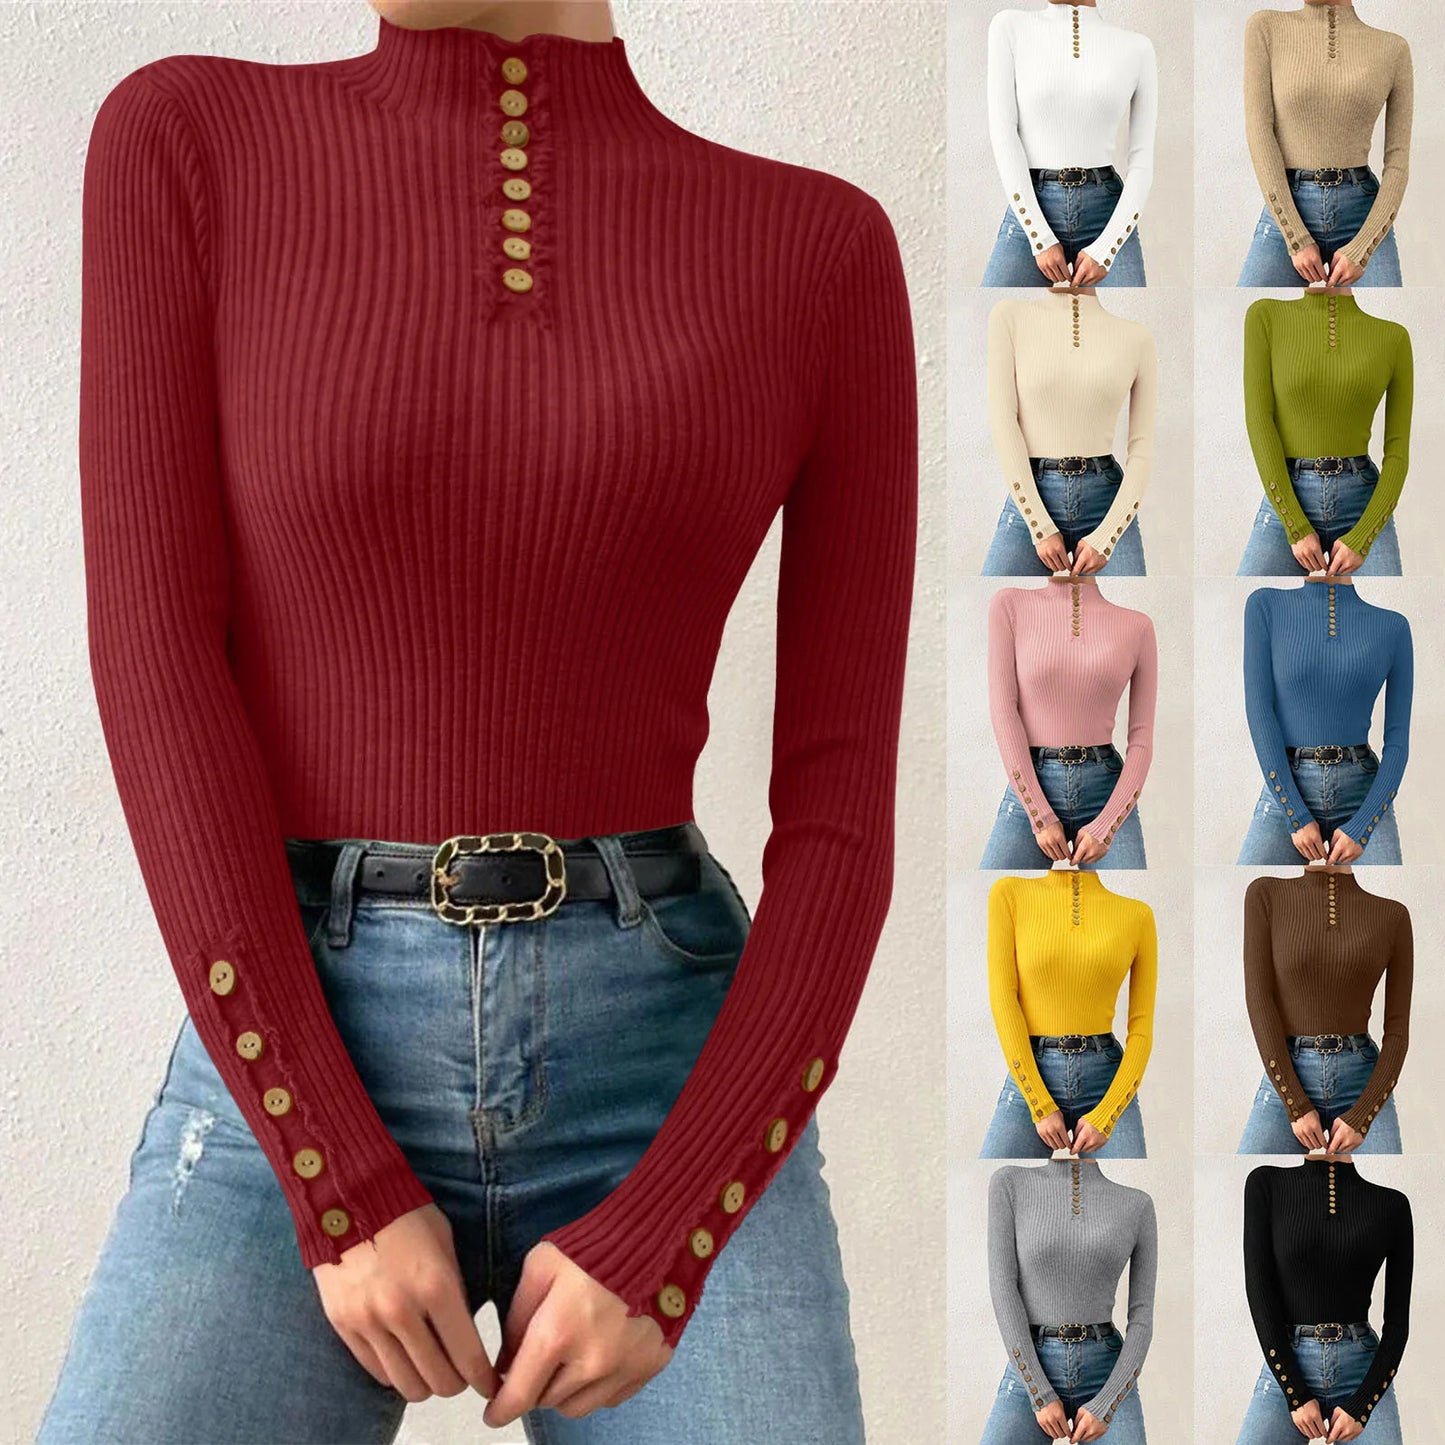 Fall/Winter Half Turtleneck Korean Fashion Elegant Basic Pullover Tops Women Casual Slim Long Sleeve Knitted Sweaters Jumpers